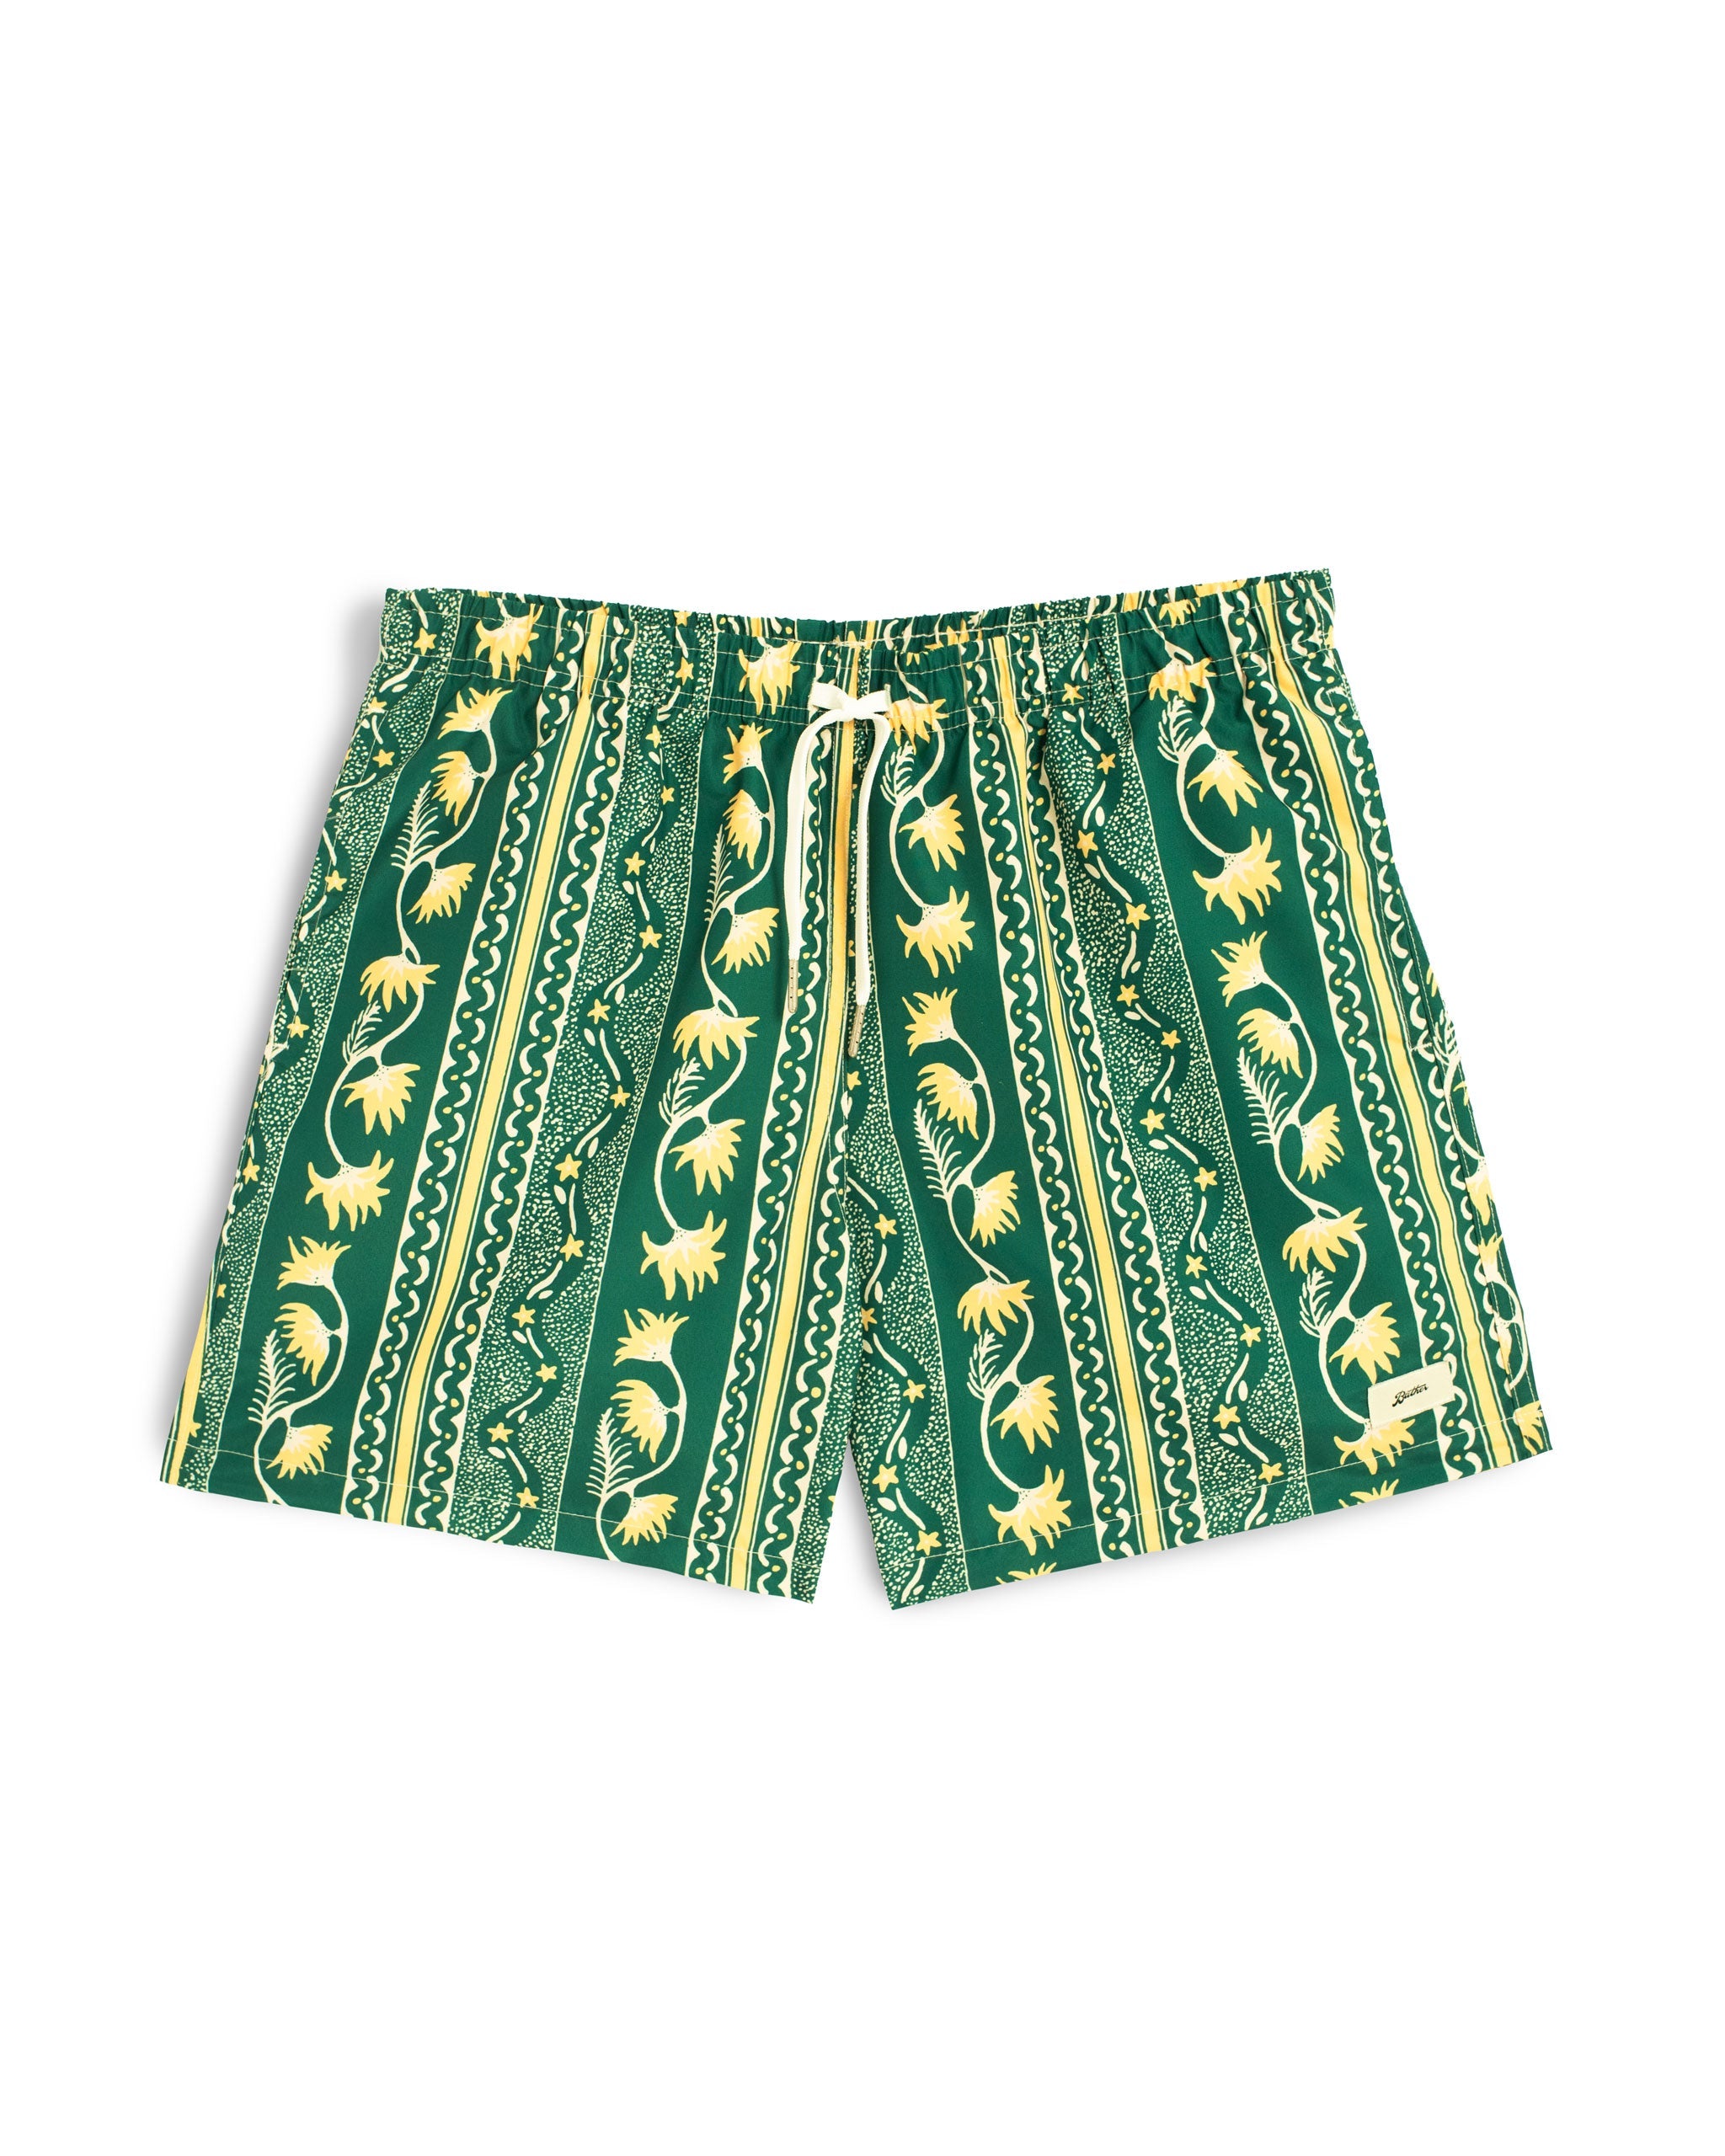 Green swim trunk with yellow and white classic stripe features intricate mosaics of flowers, sand, and starfish